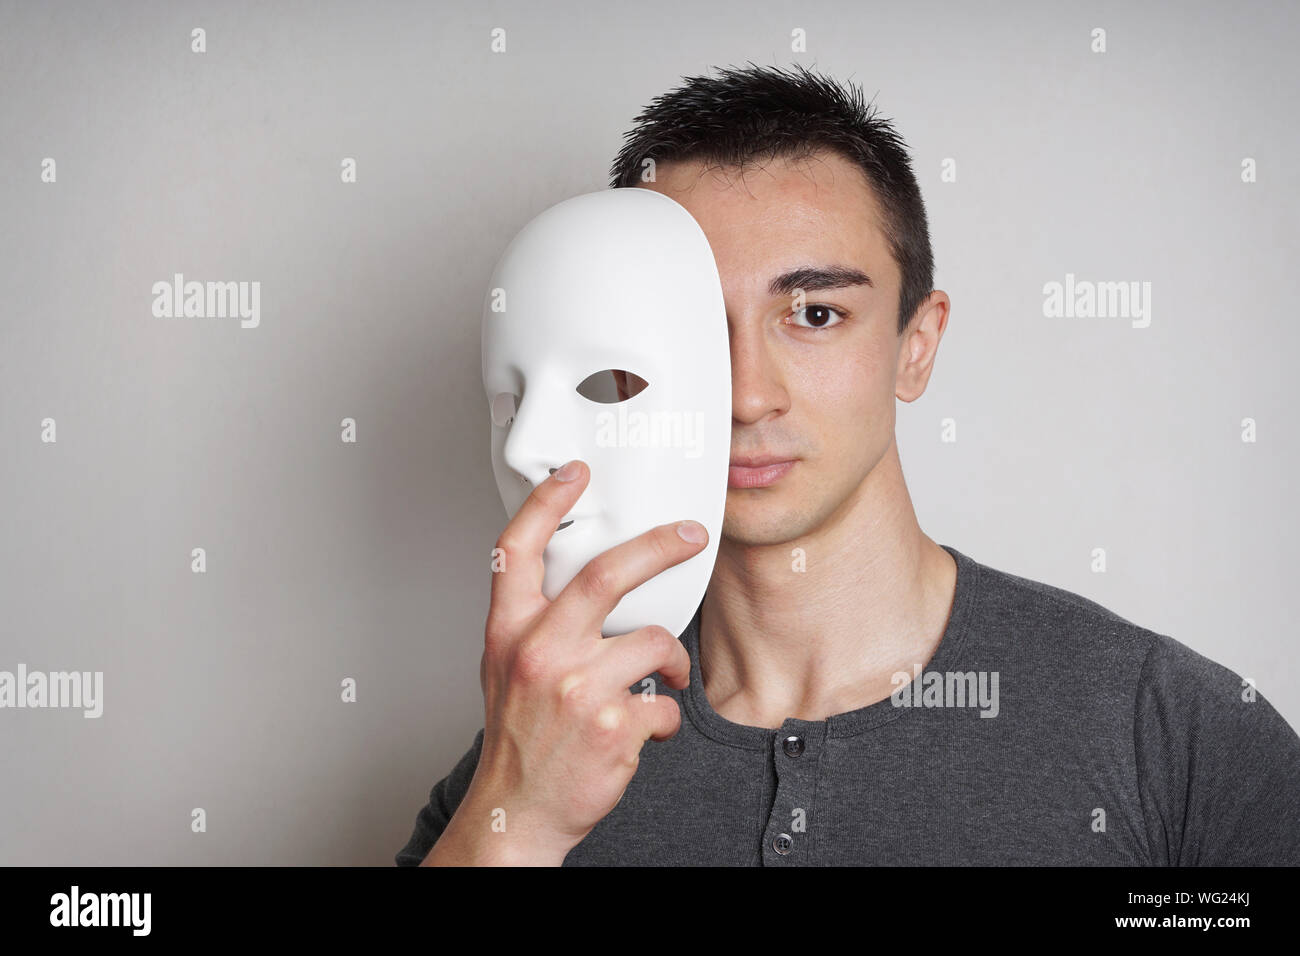 Portrait Of Young Man Holding Mask Against Gray Background Stock Photo ...